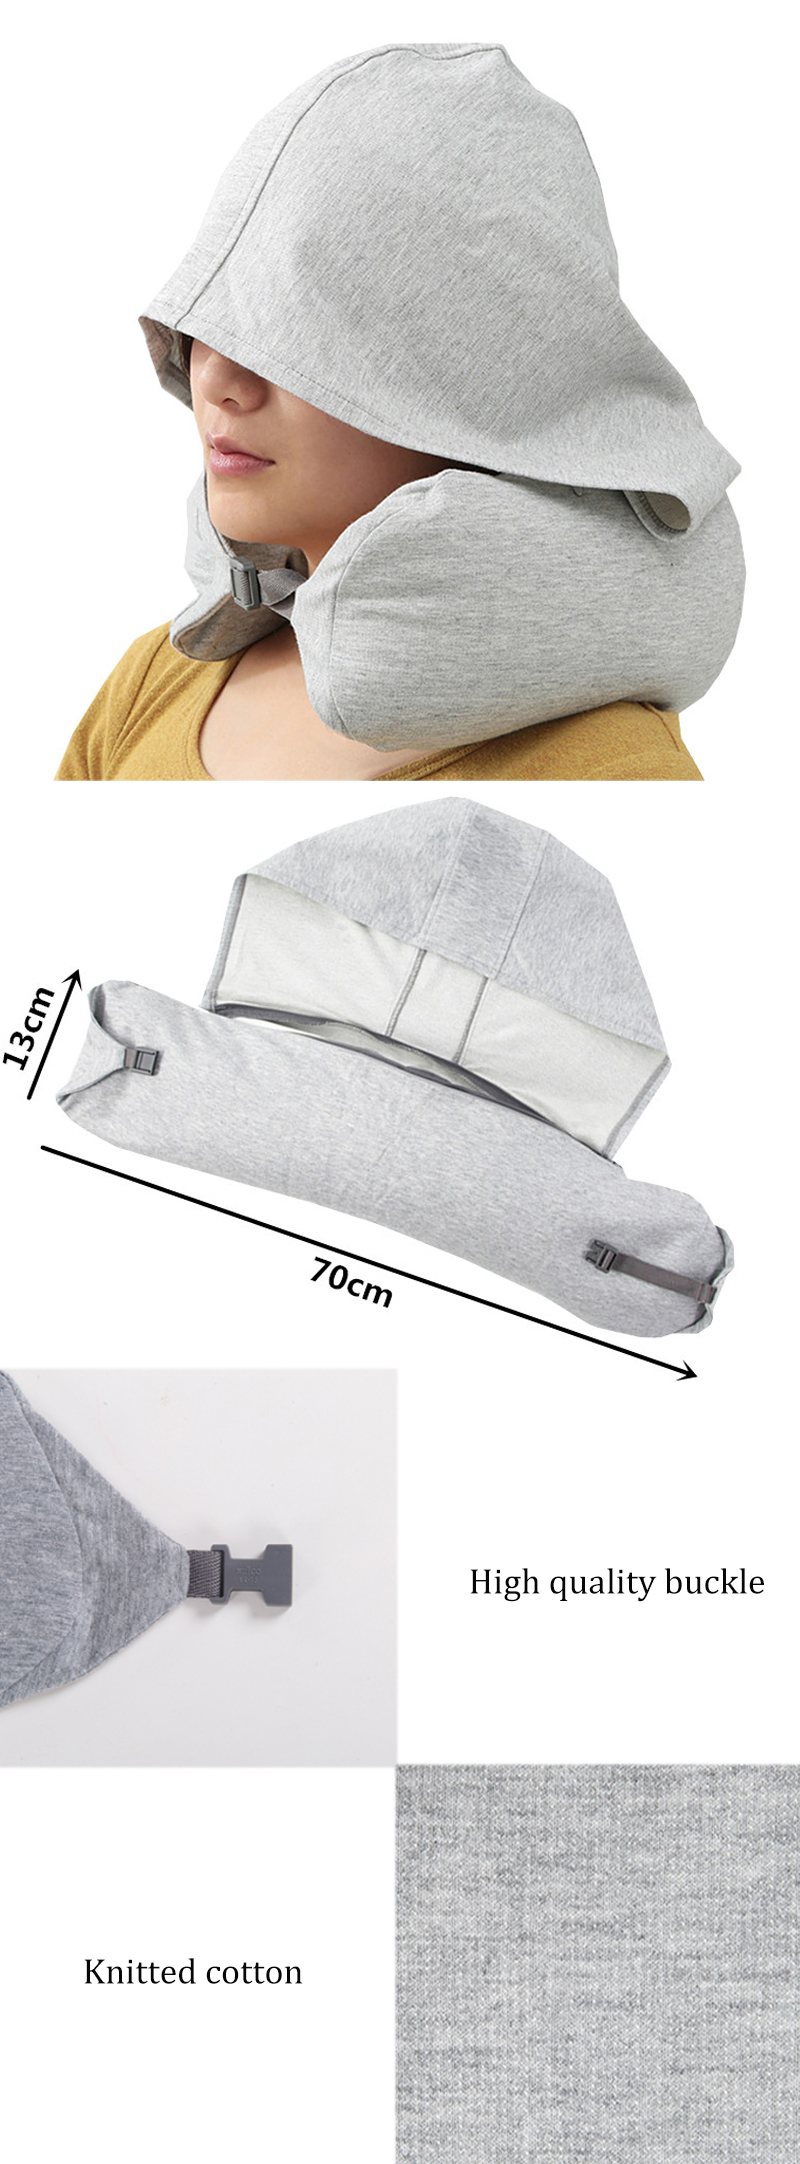 Multi-functional-U-shape-Pillow-Camping-Shading-Rest-Hat-Neck-Support-Pillow-Accessories-Supplies-1349860-1